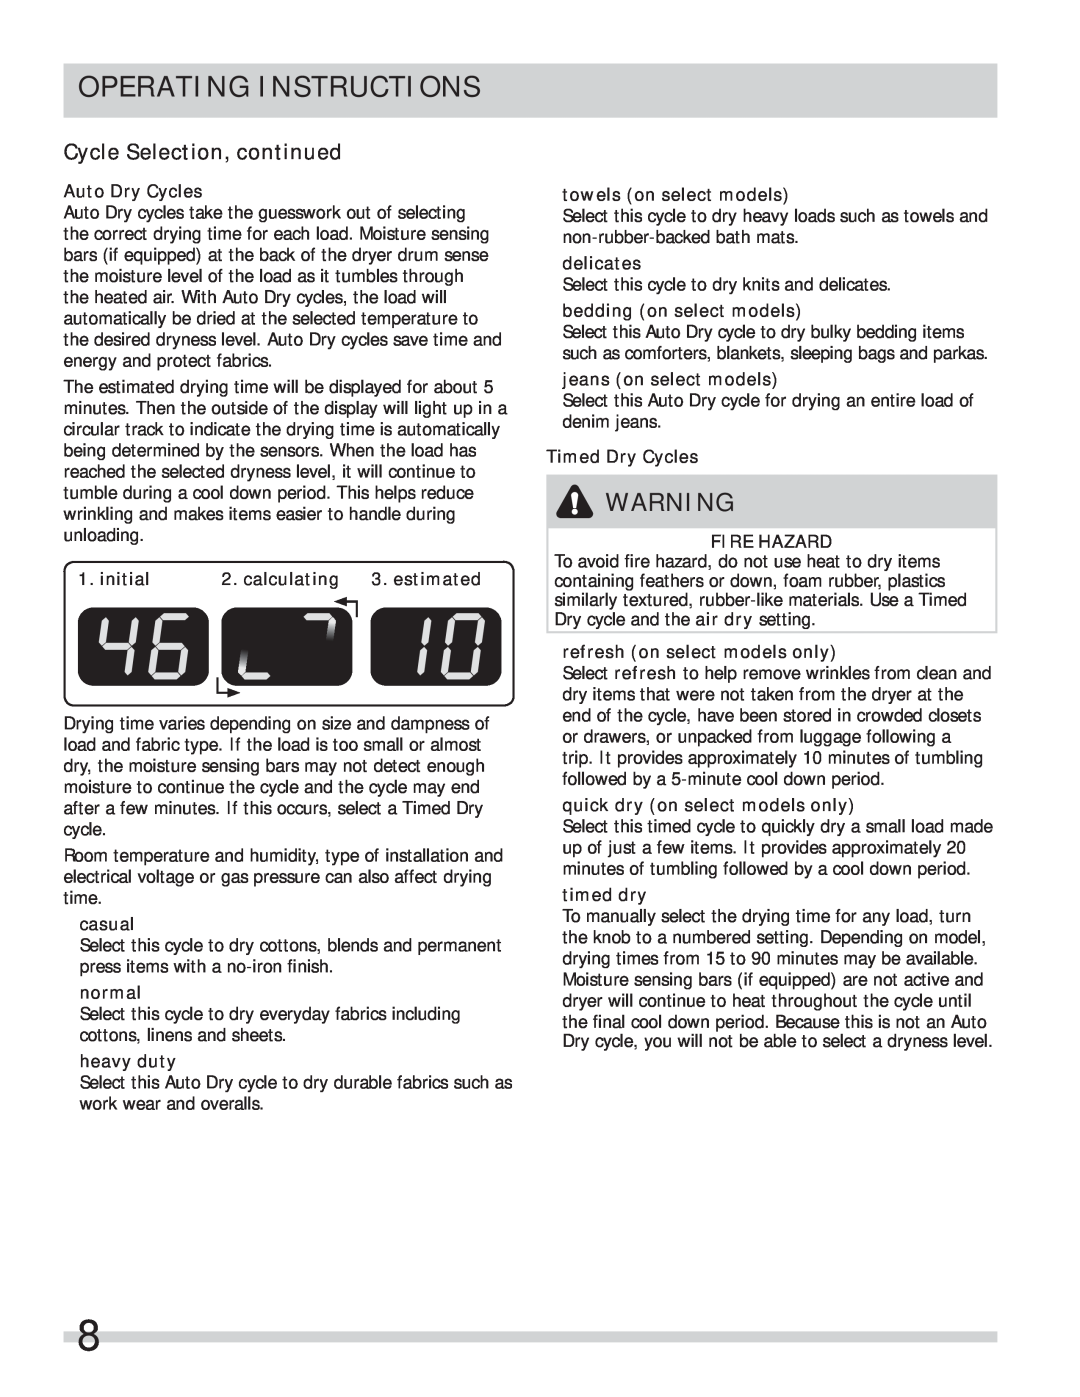 Frigidaire FARE1011MW important safety instructions Cycle Selection, continued, Operating Instructions 